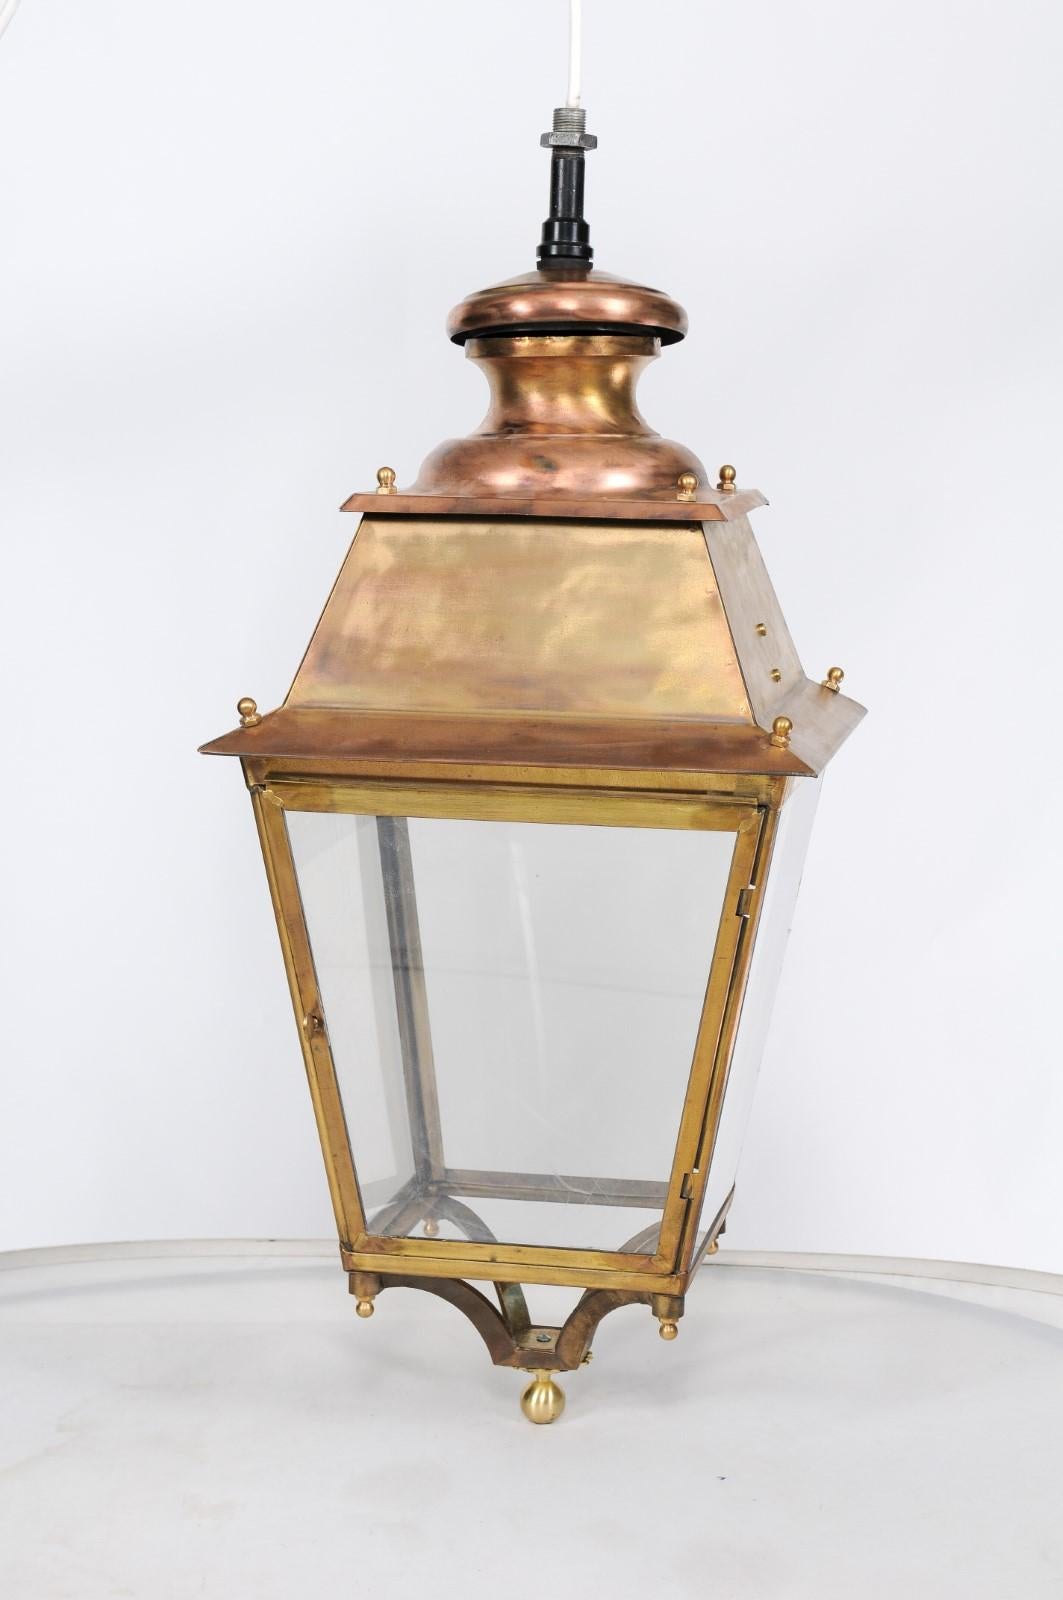 A pair of French brass, copper and plexiglass lanterns from the early 20th century, with single door and discreet finials. We’re always on the lookout for gorgeous French lanterns, like the kind you see hanging in charming villages, so when we